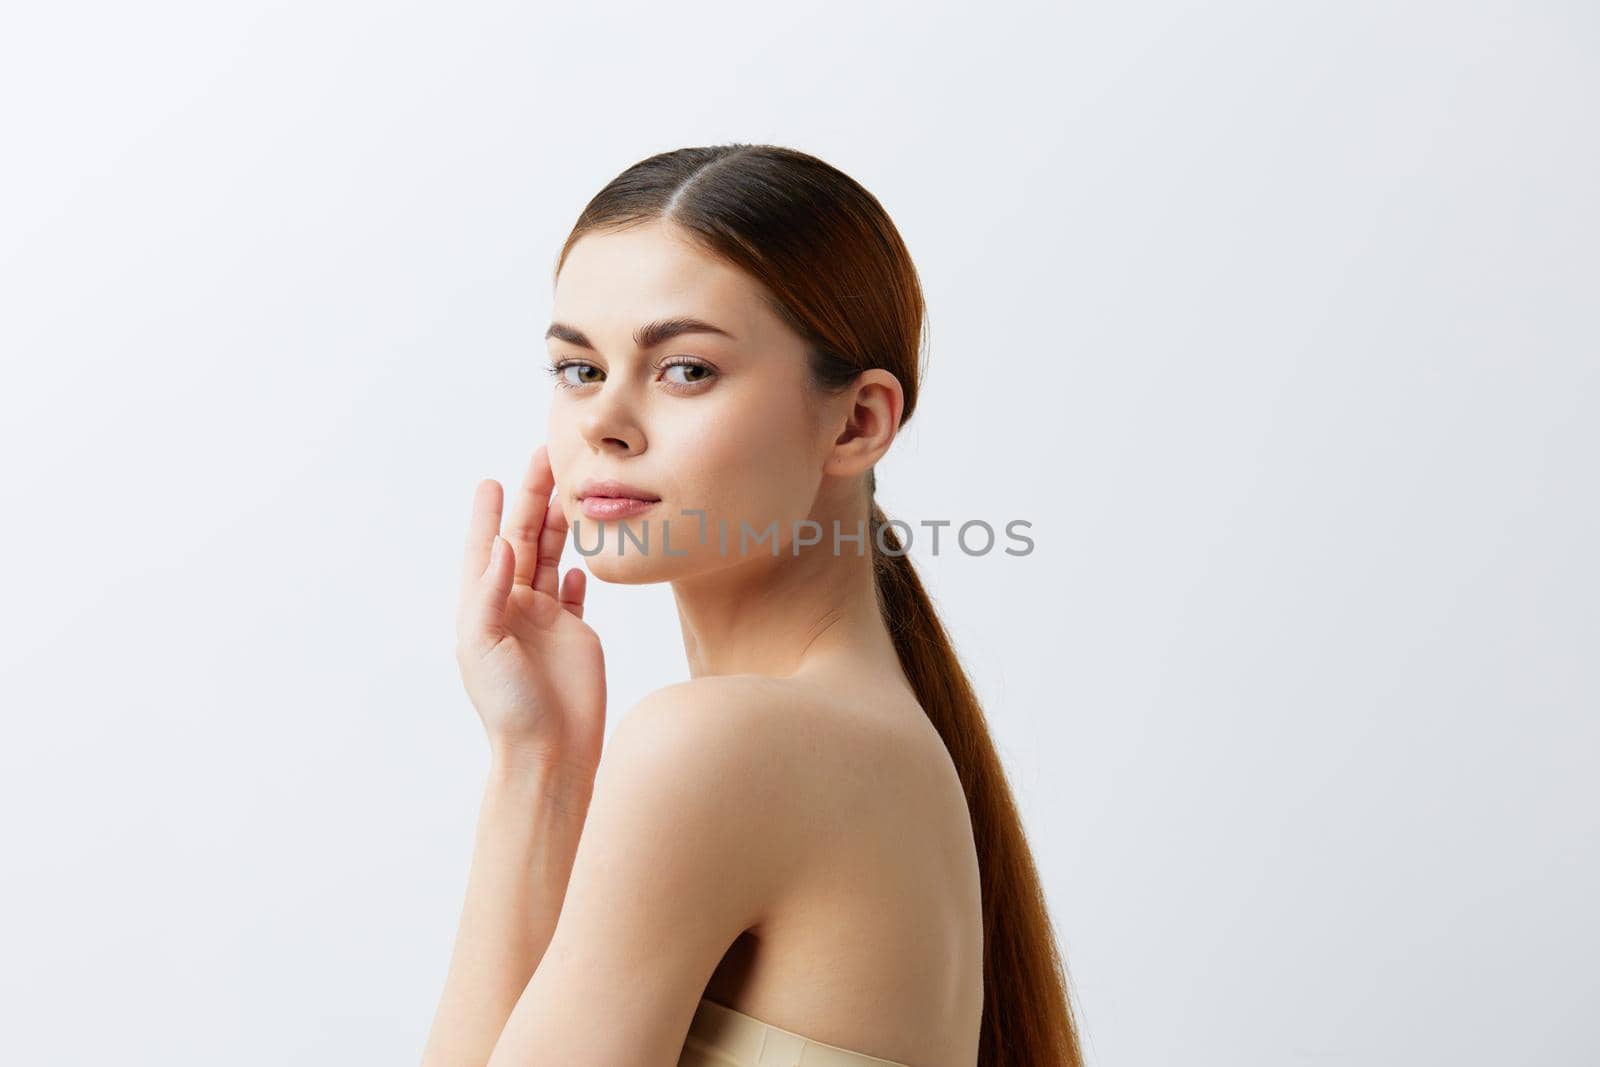 woman smiling woman bare shoulders clean skin charm Model light background. High quality photo